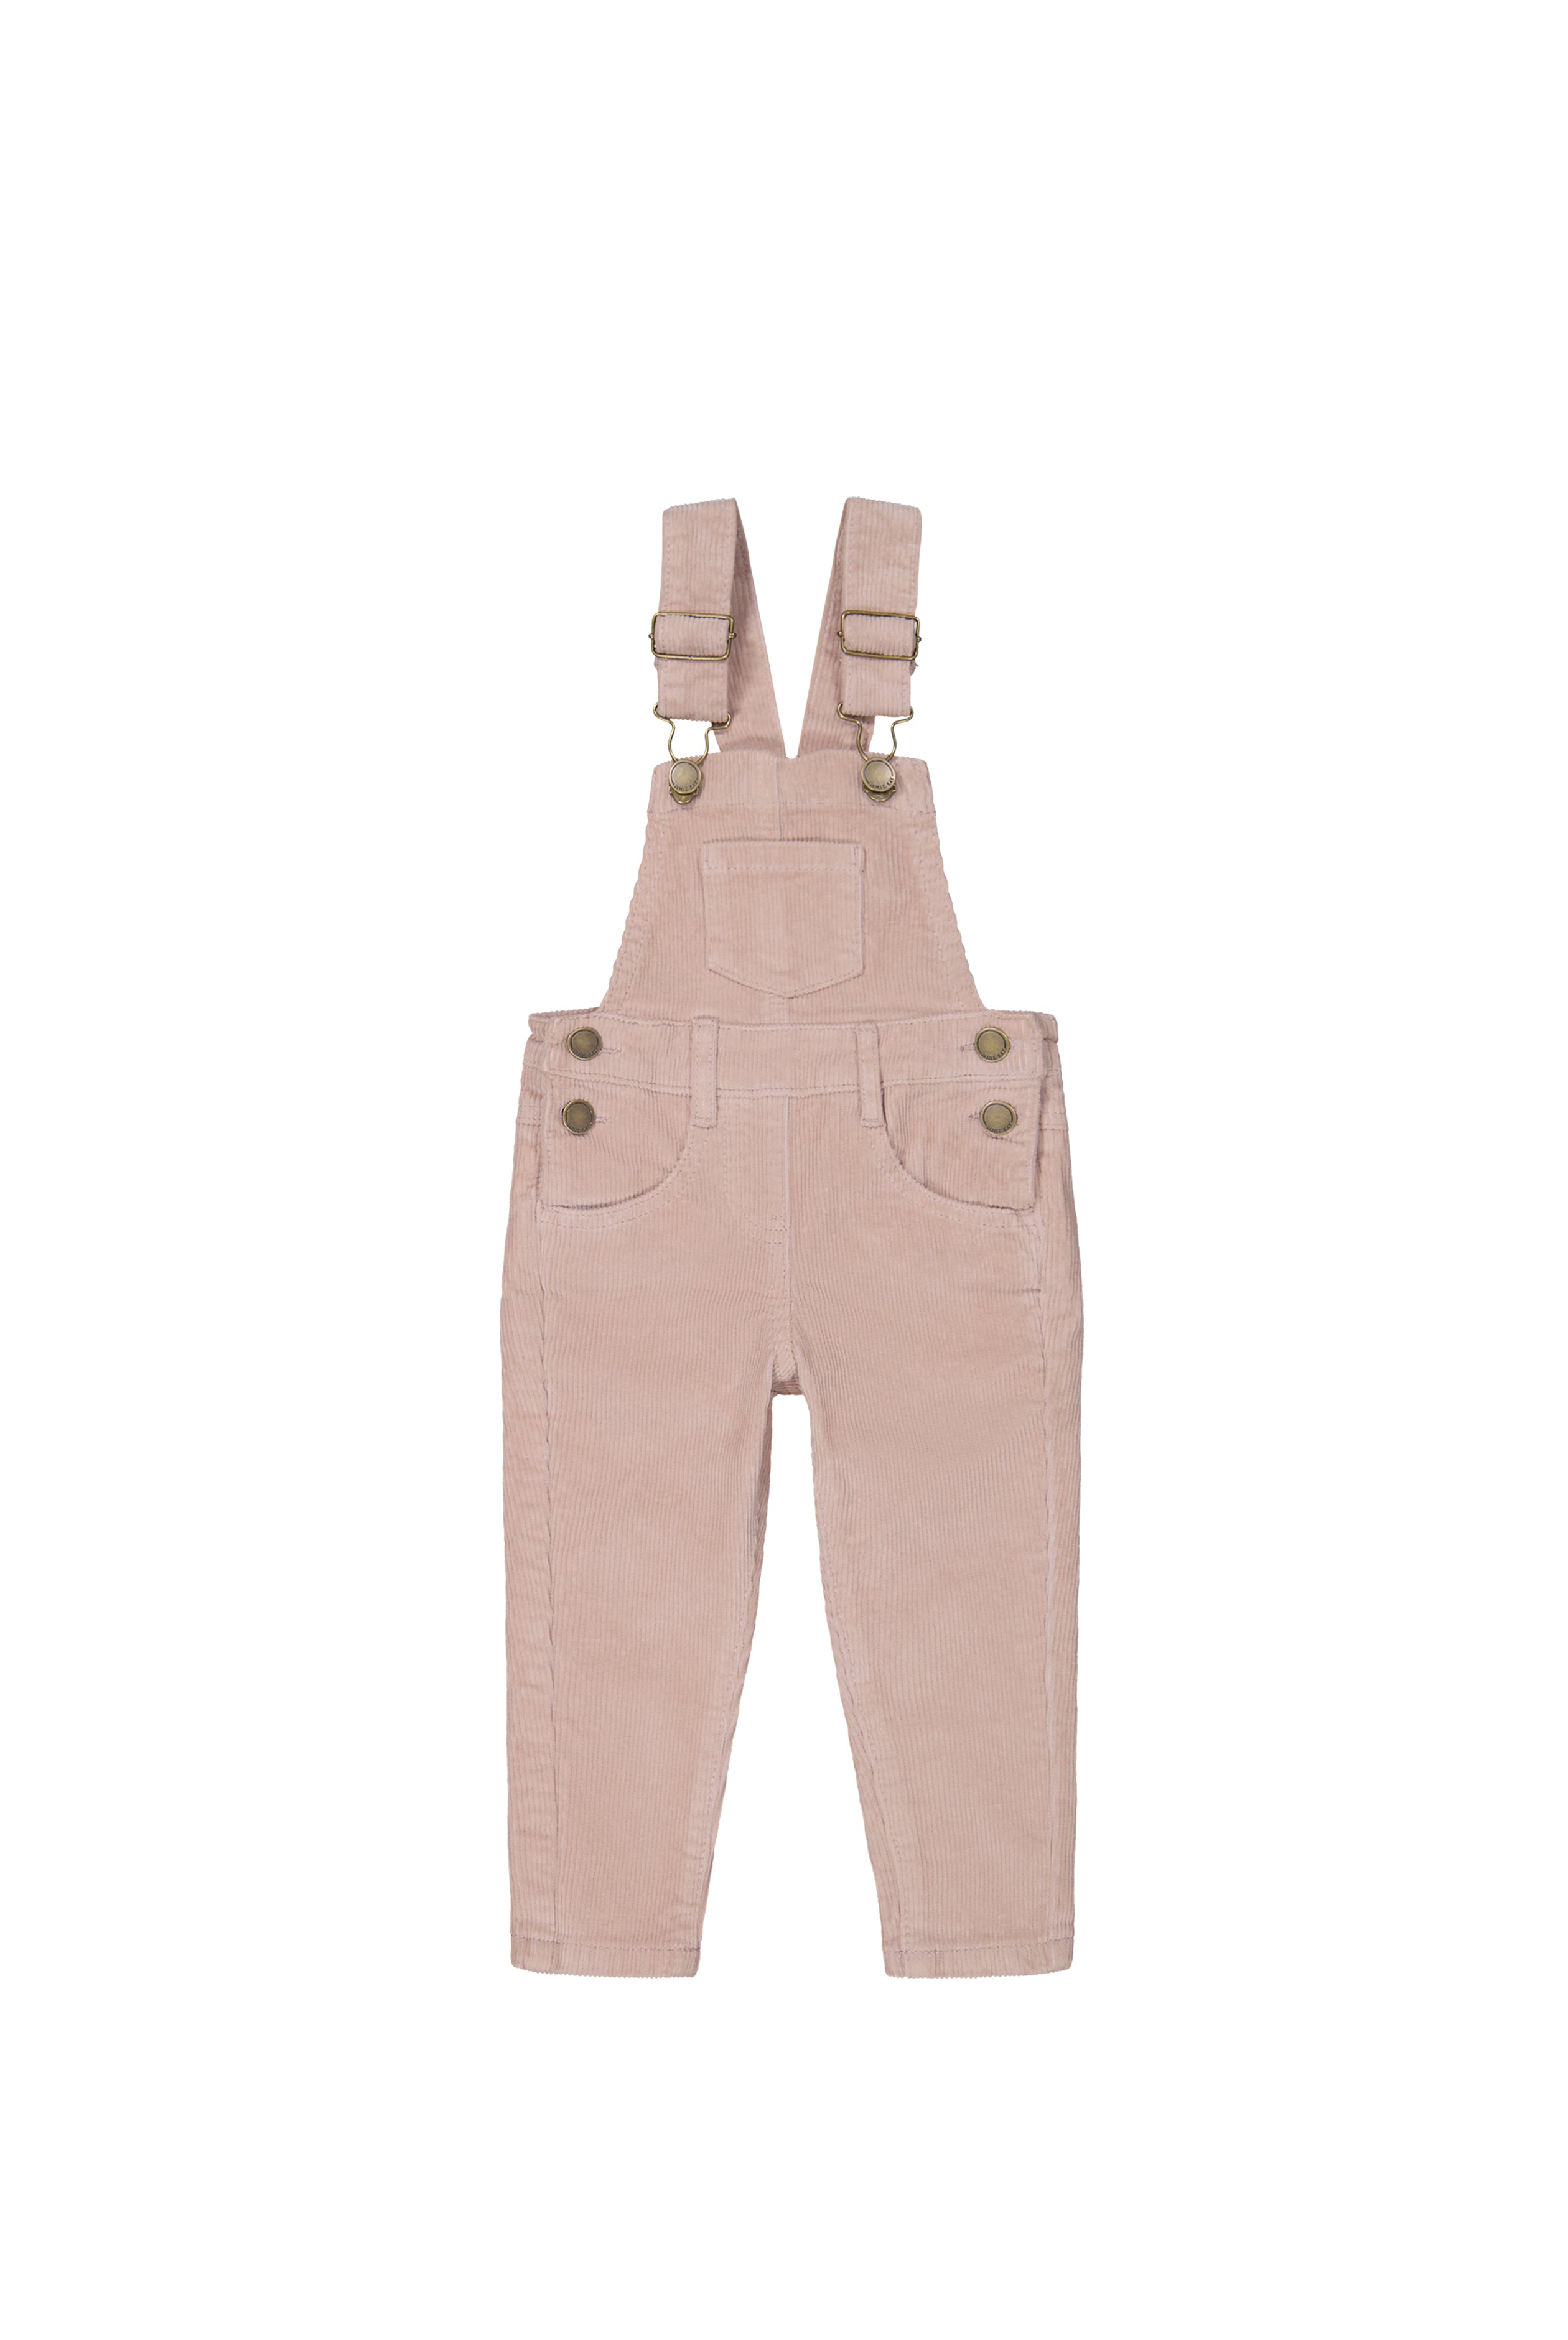 Pink corduroy overall toddler